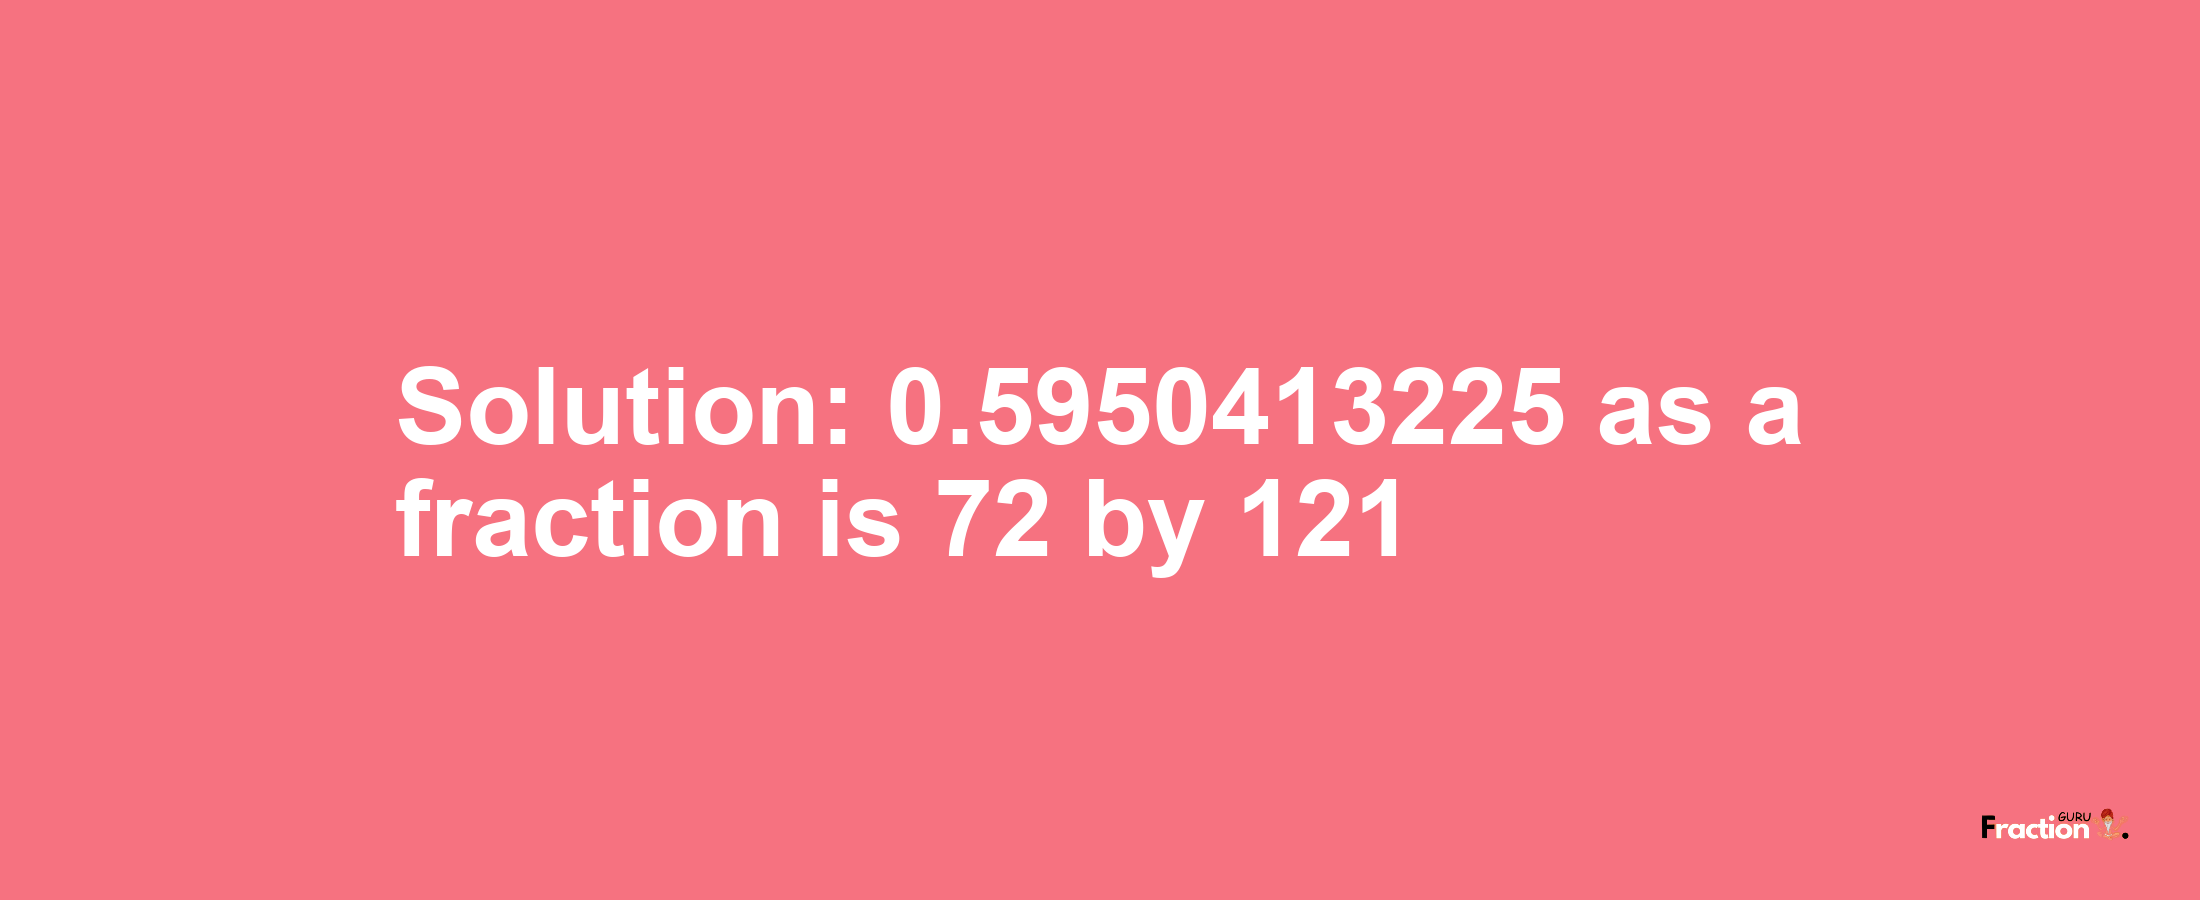 Solution:0.5950413225 as a fraction is 72/121